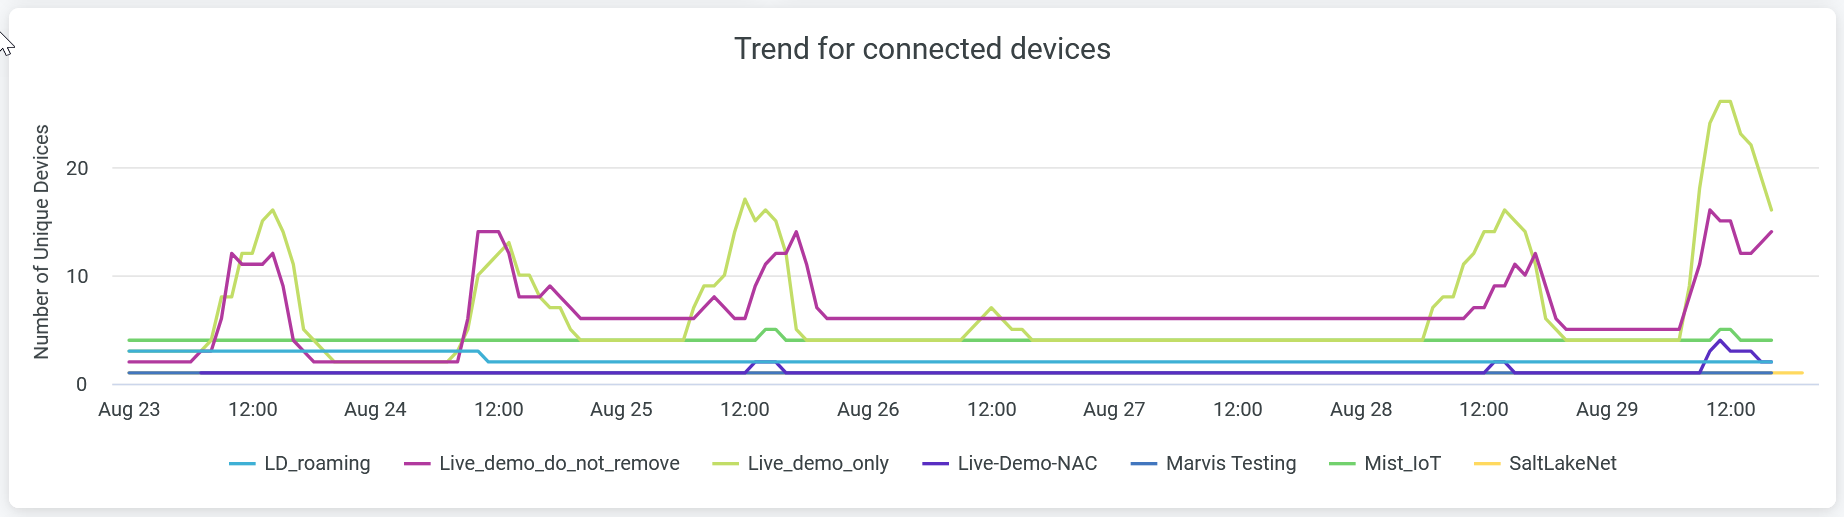 Trend for Connected Devices